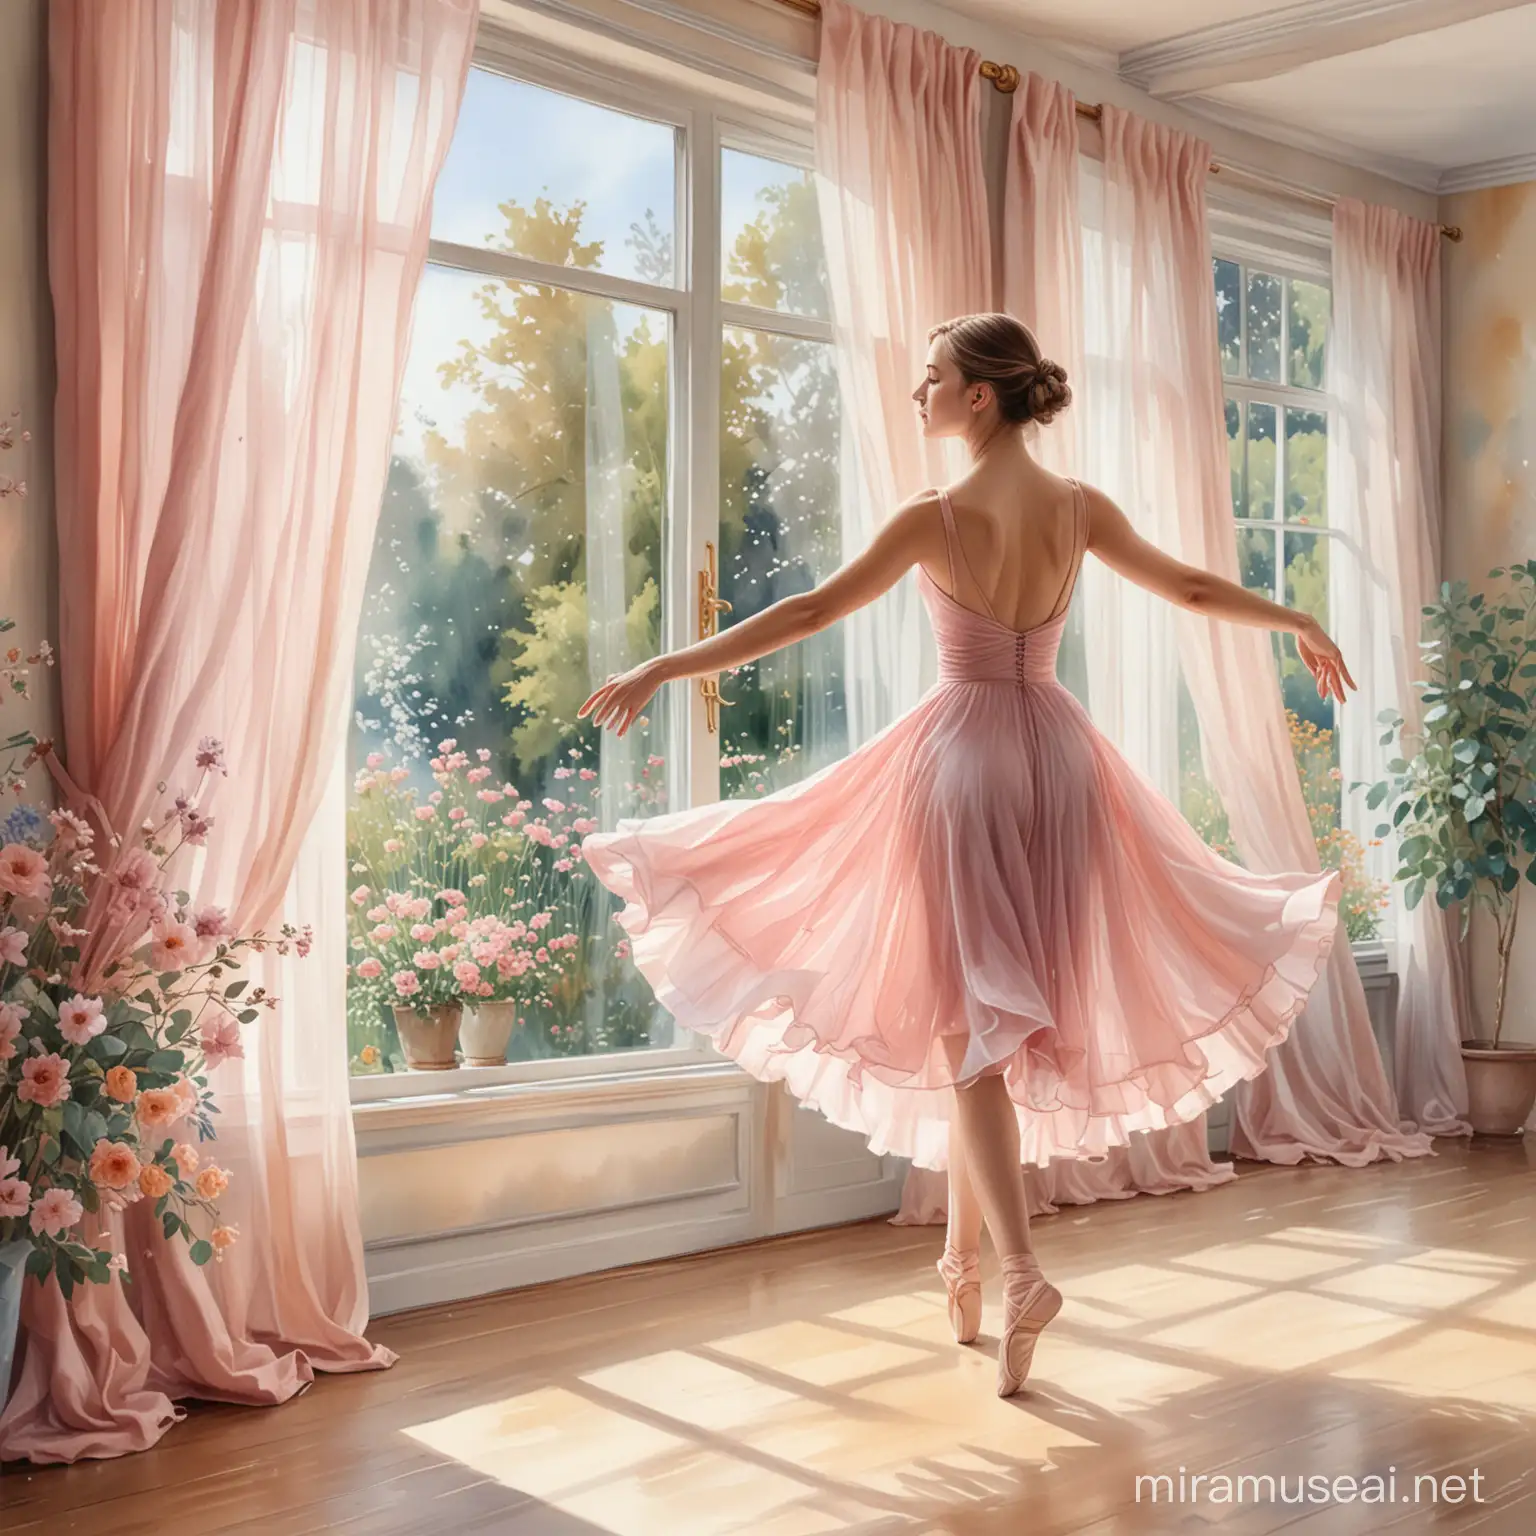 a ballerina on tiptoe, flowing pink dress, in a dance studio, transparent curtains flowing, open windows with a view to a garden full of flowers, predominantly beige, brown, gold, pastel blue and pastel pink, watercolor, smooth lines, detailed.